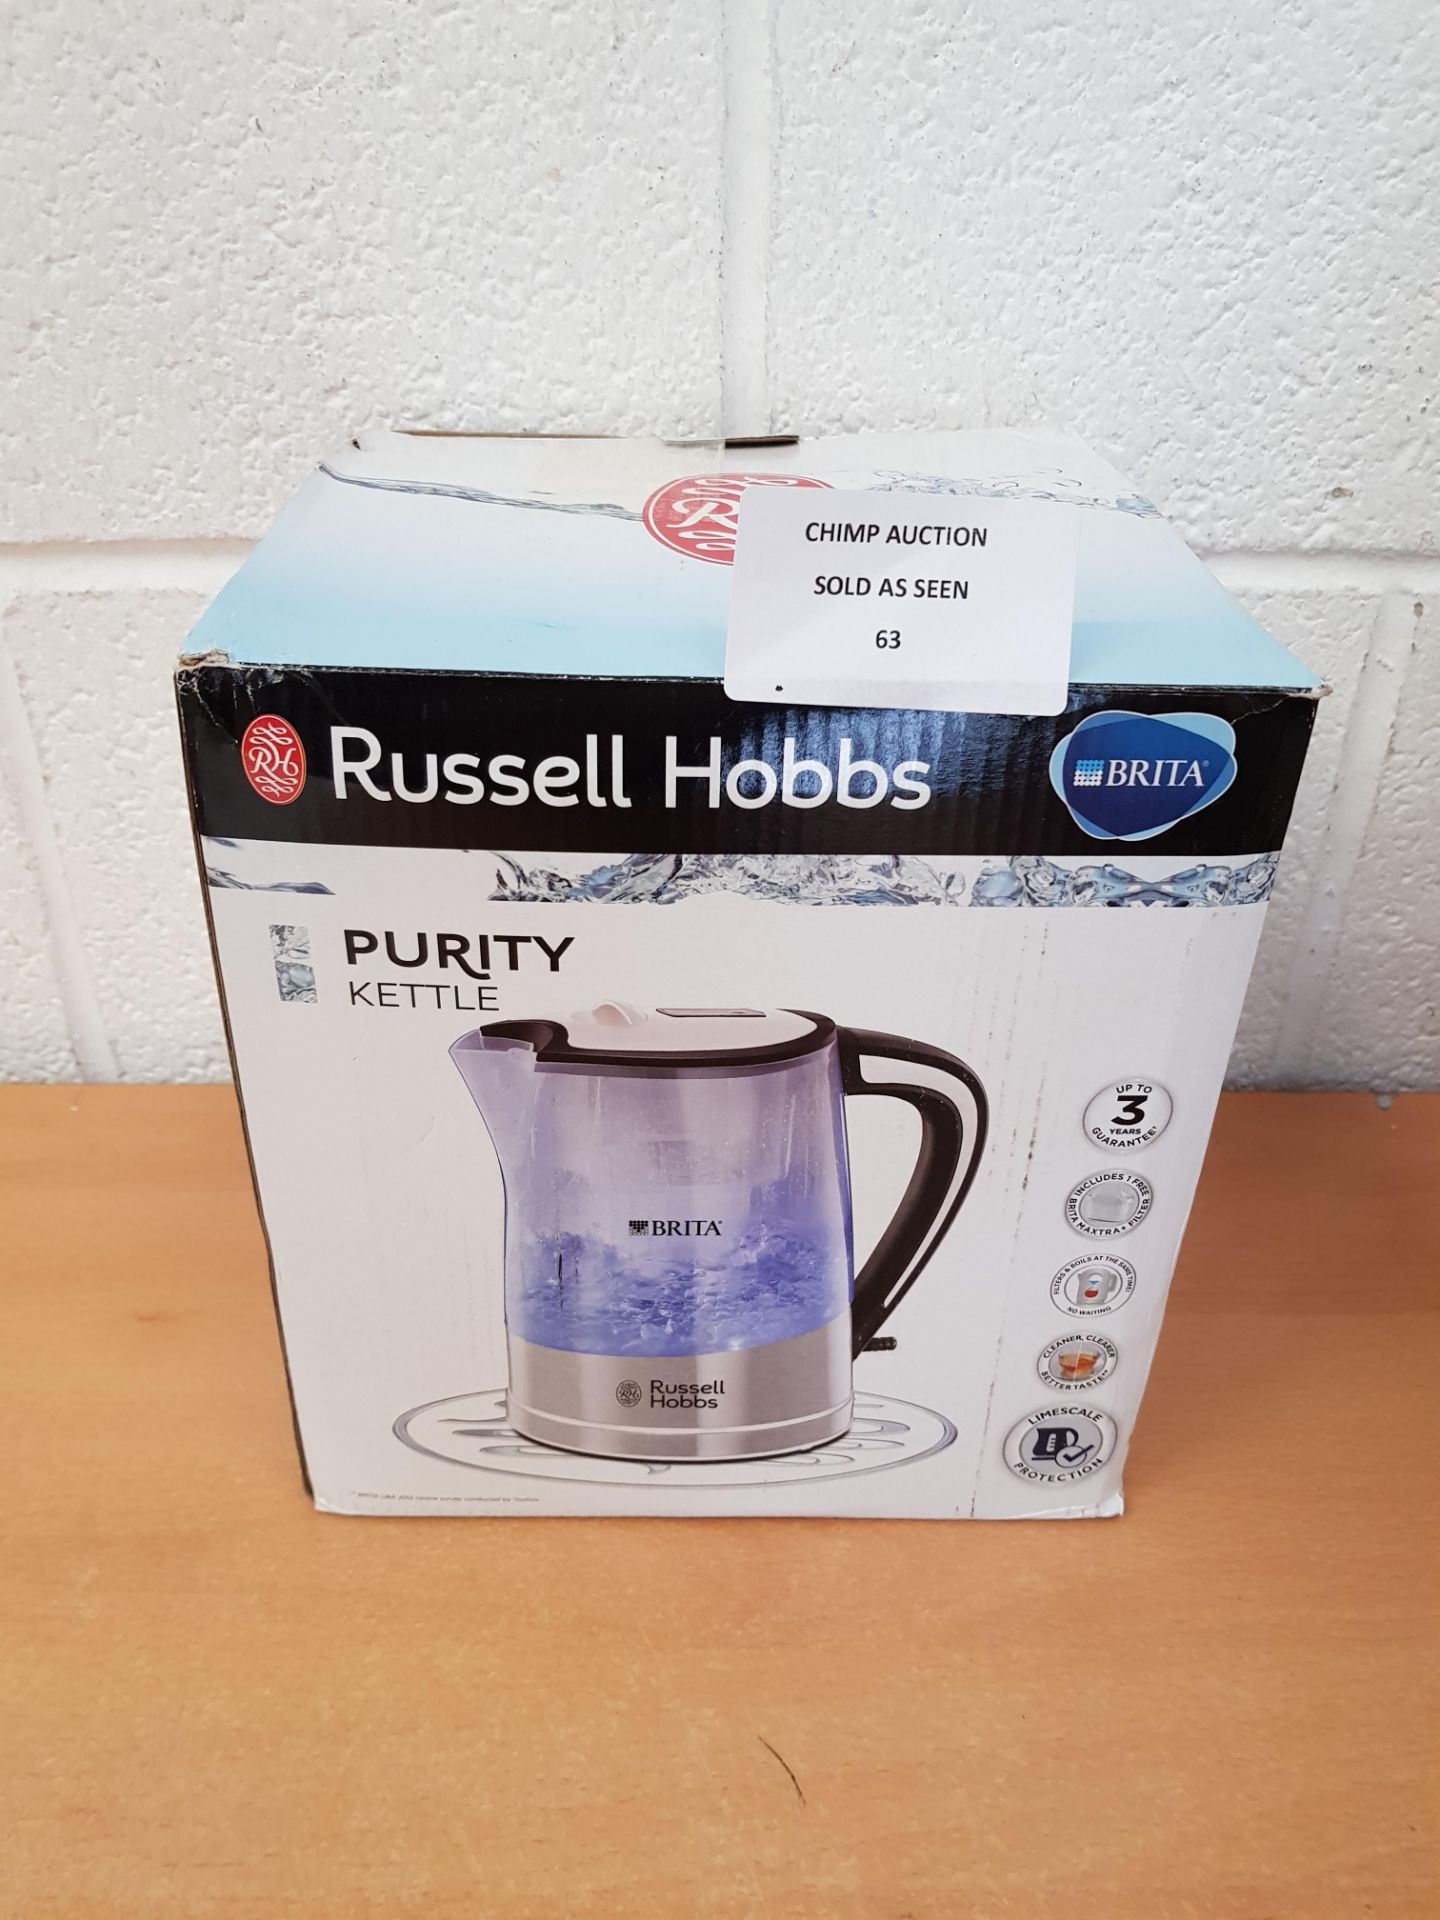 Russell Hobbs Purity Kettle